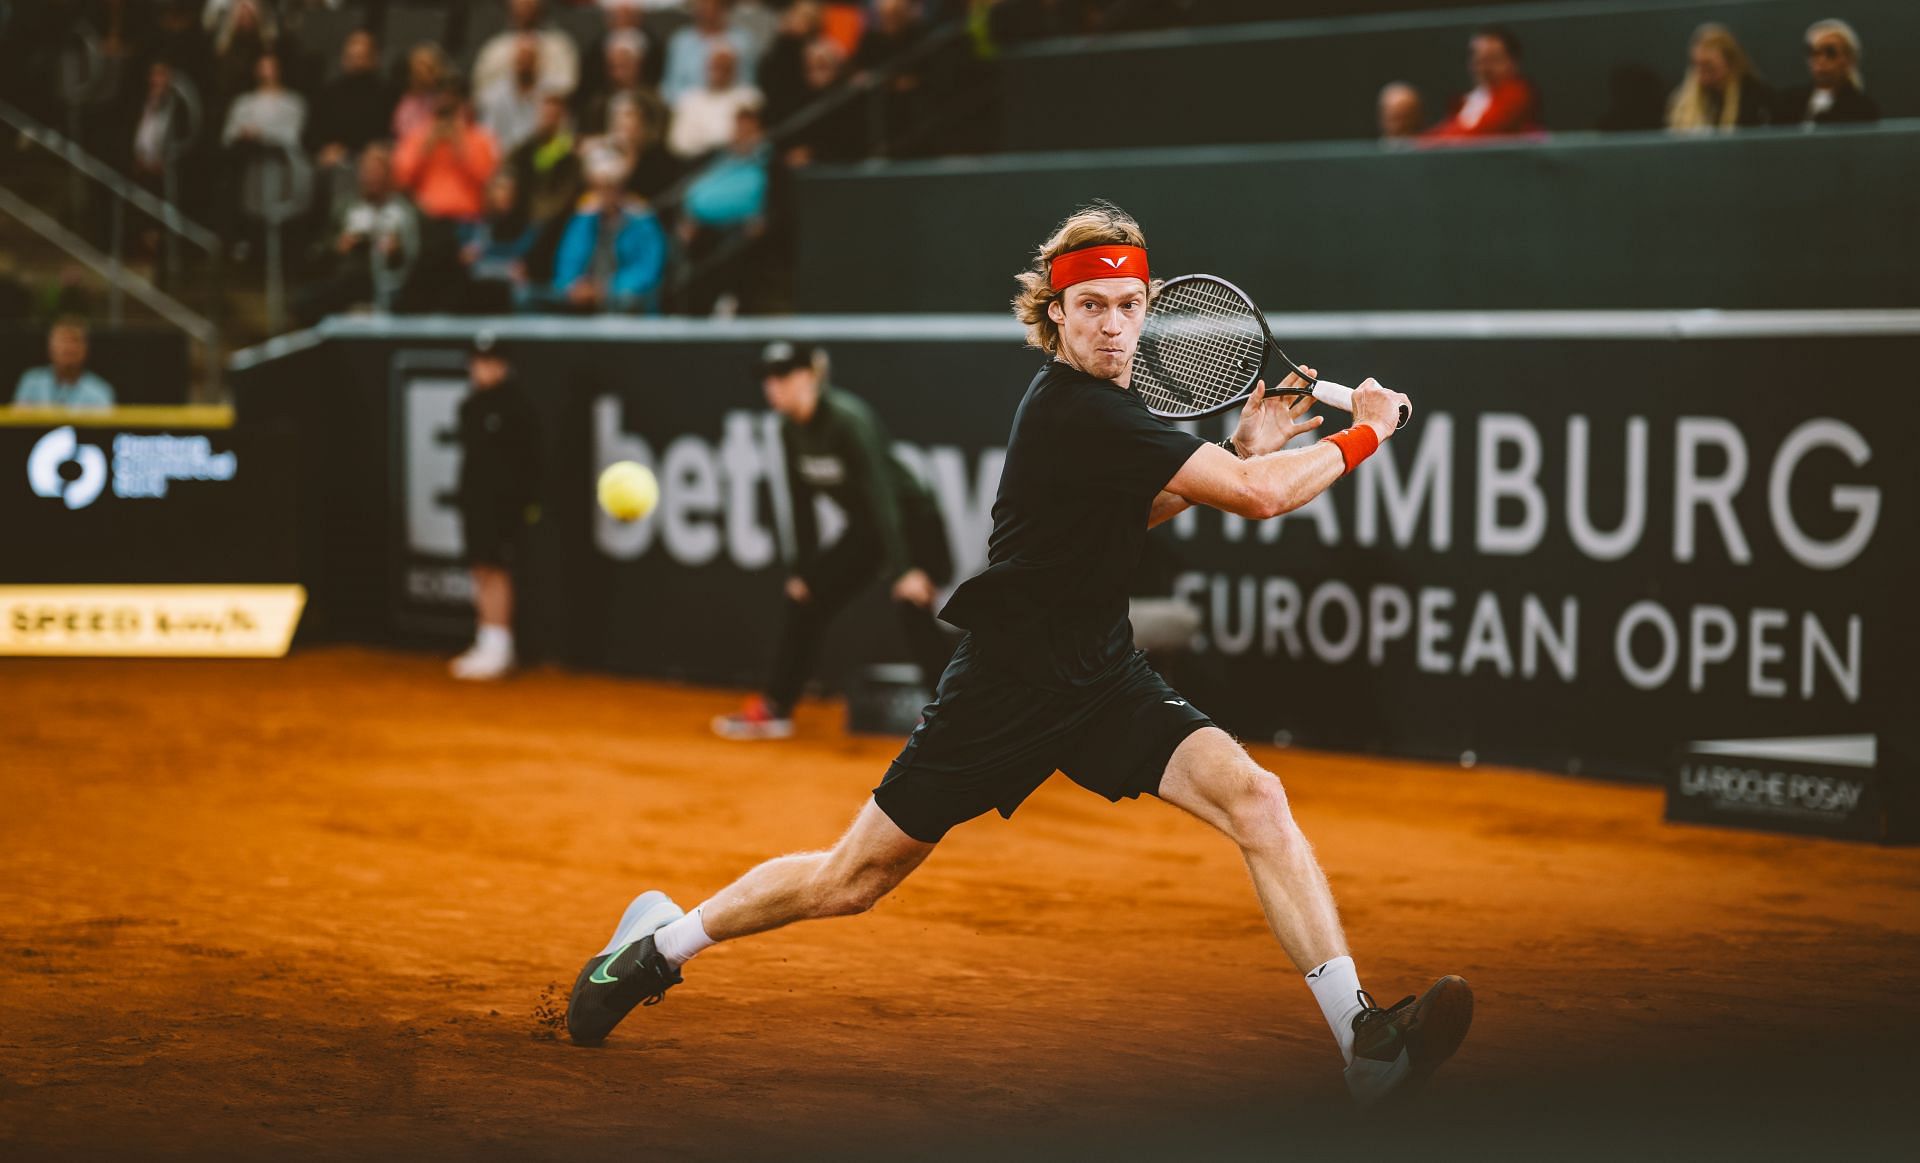 Andrey Rublev in action at the 2023 Hamburg European Open.